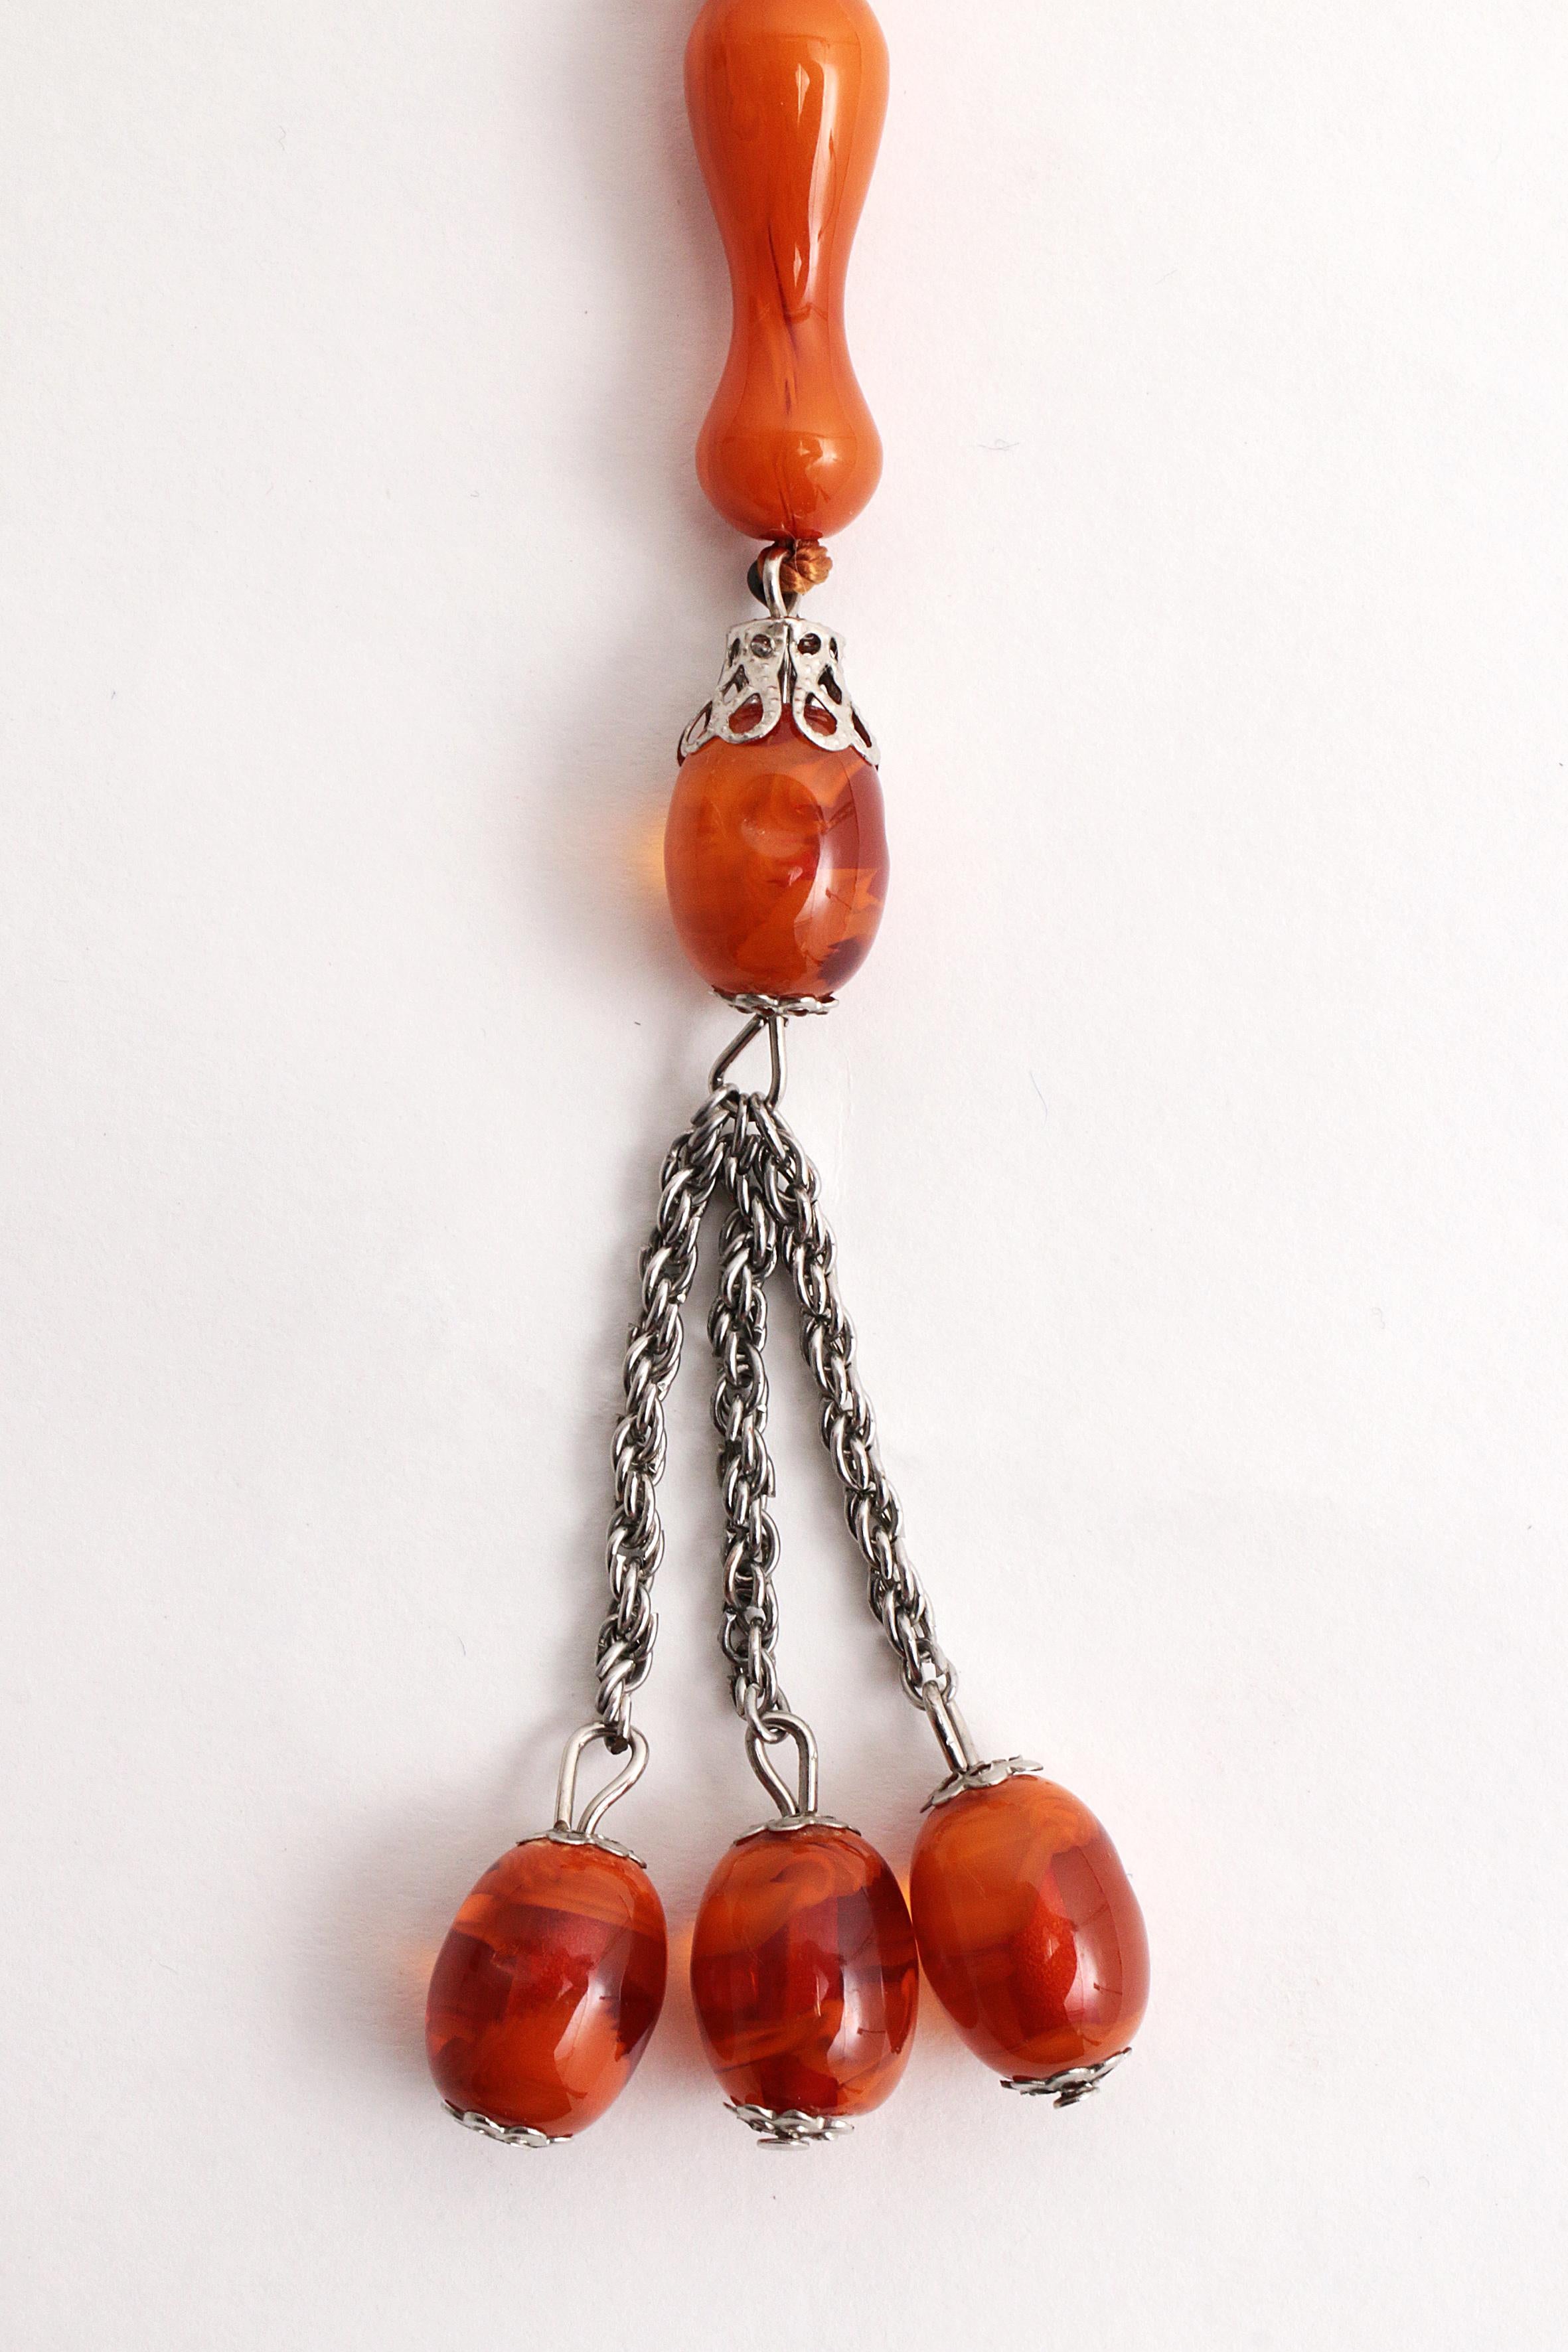 Beautiful Prayer Necklace Made of Amber from the 1960s For Sale 2